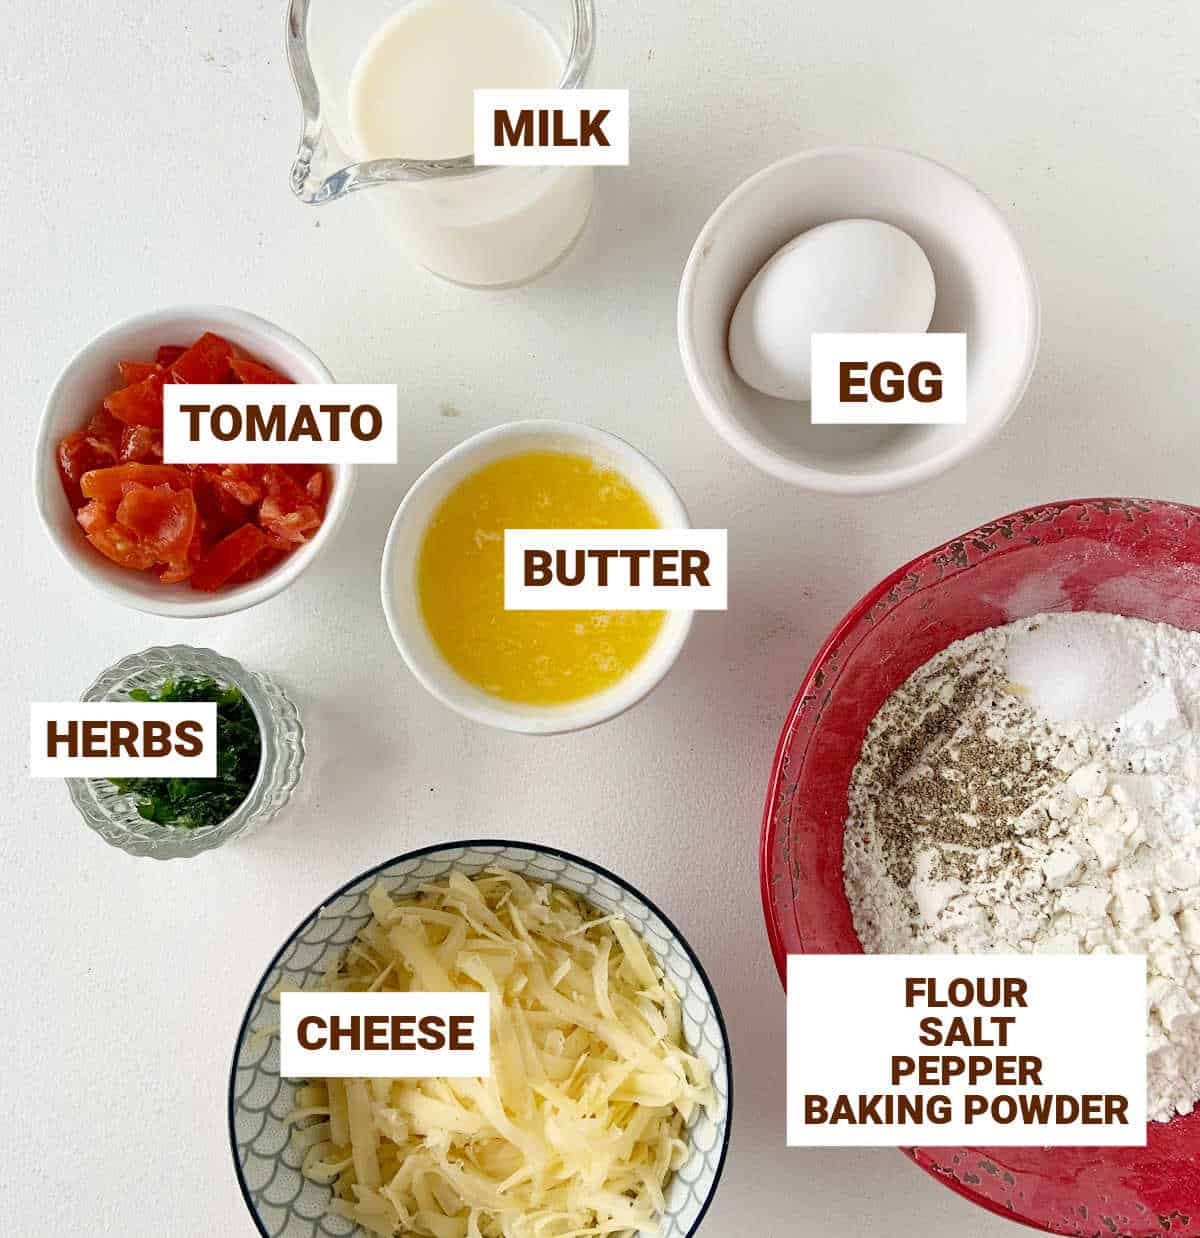 Bowls containing ingredients for savory muffins including cheese, tomato, sesonings, egg, flour mixture, milk, and butter. White surface.